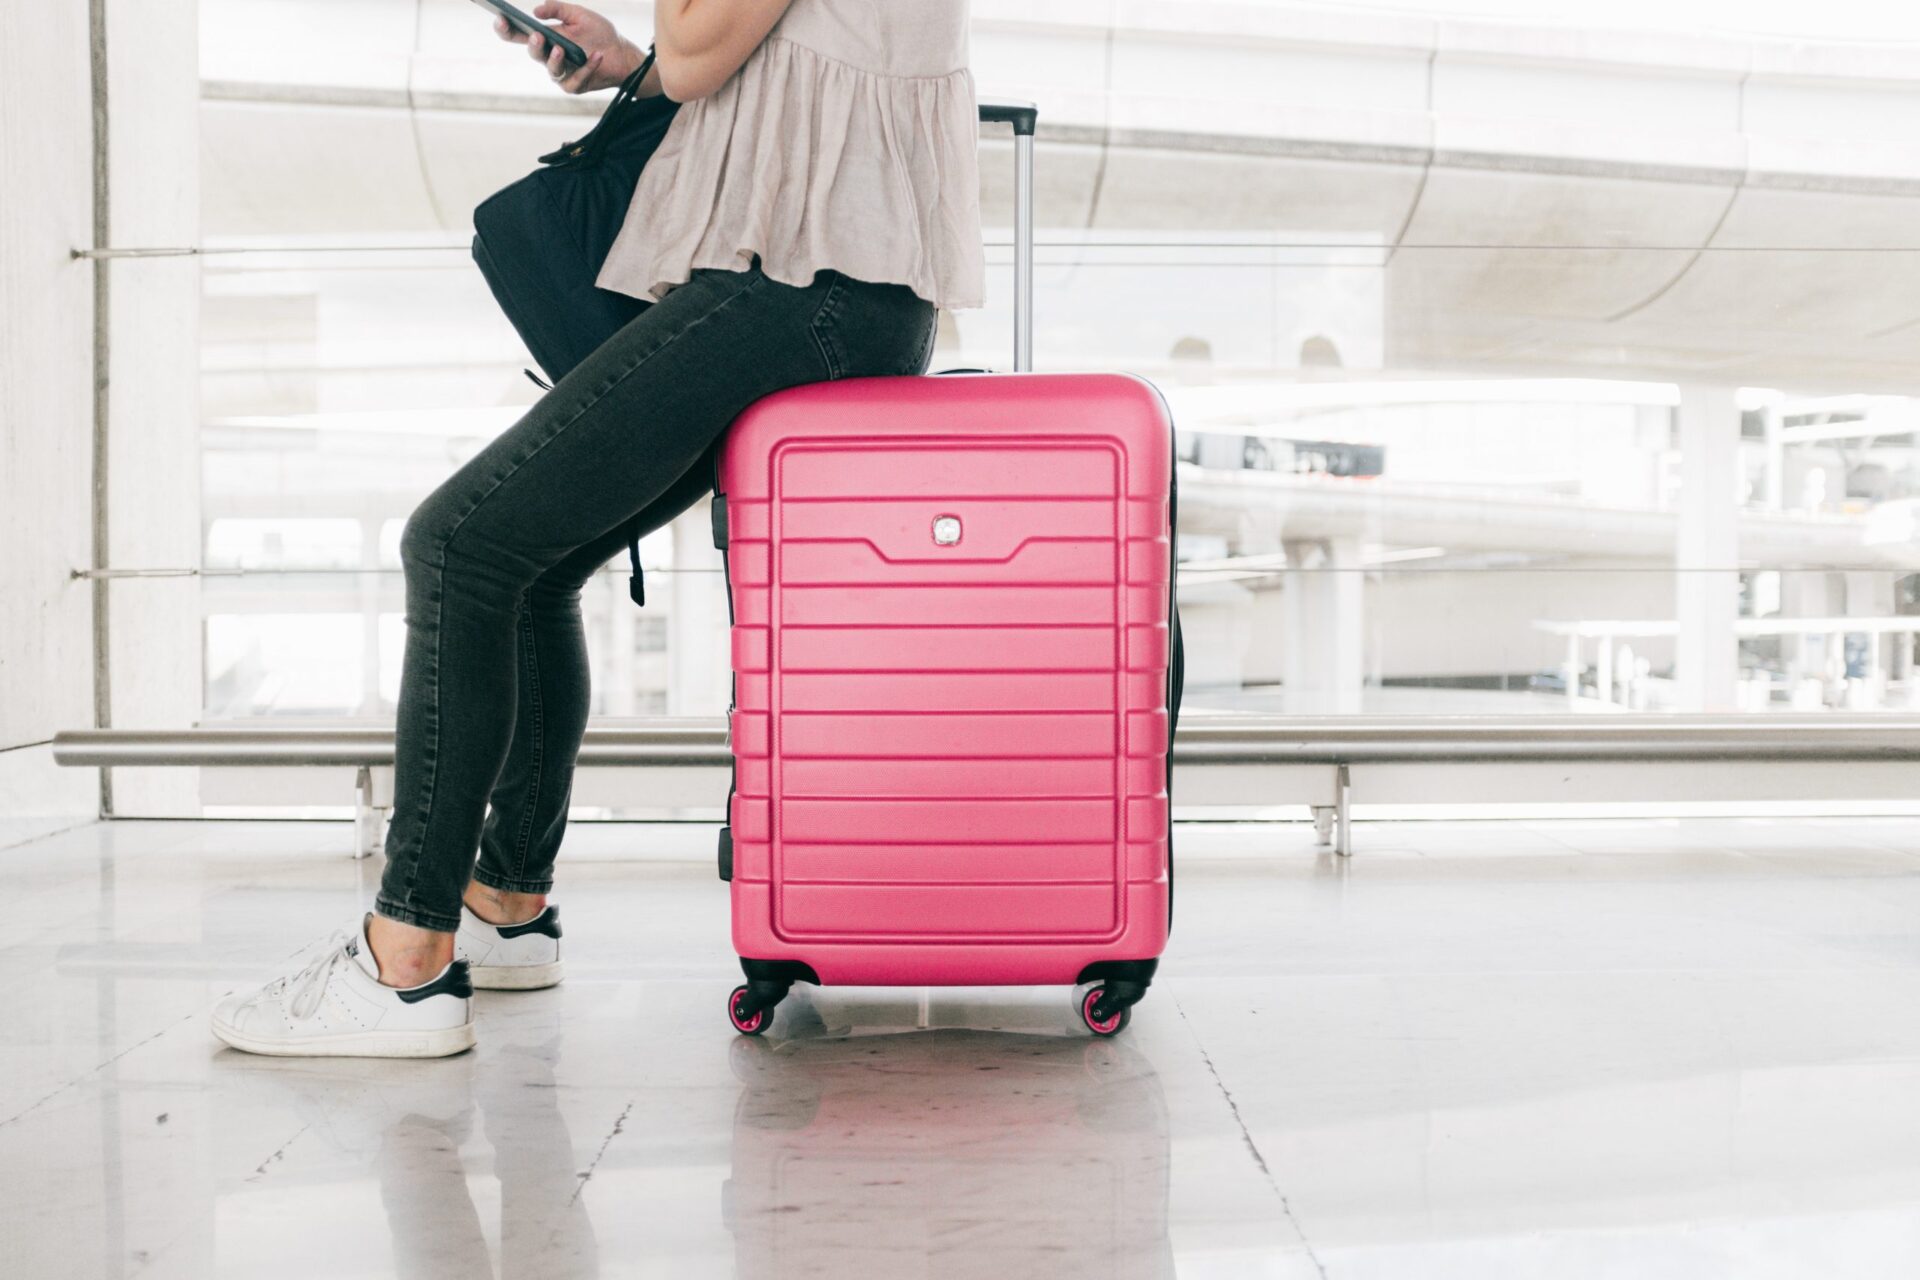 packing your suitcase to travel ergonomically